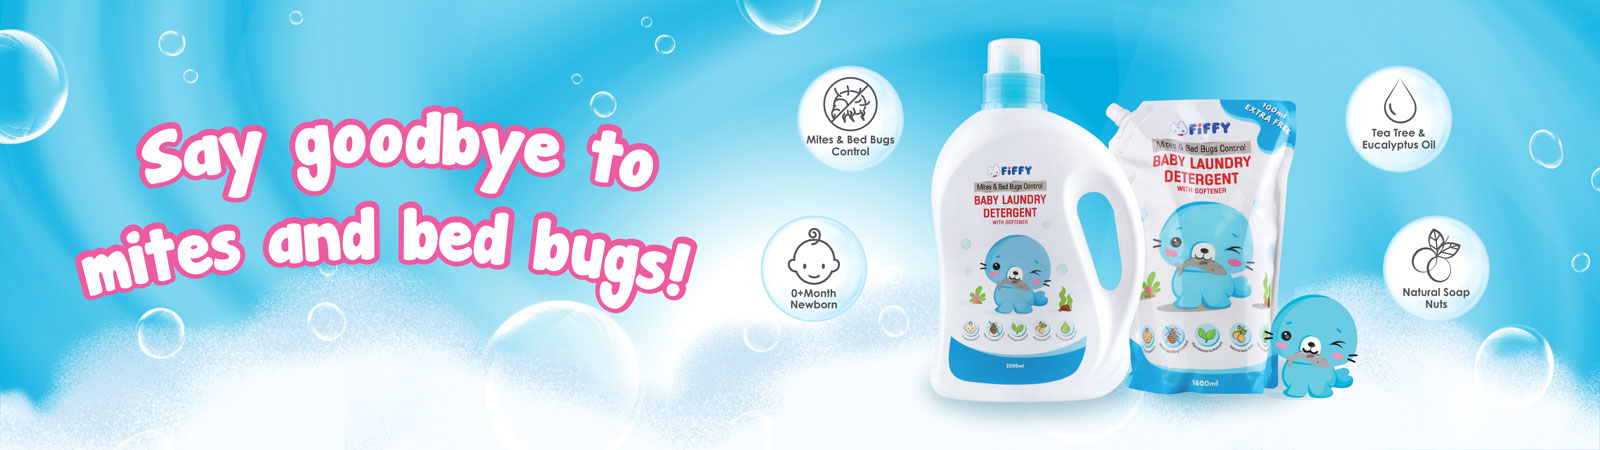 Fiffy Baby Laundry Detergent